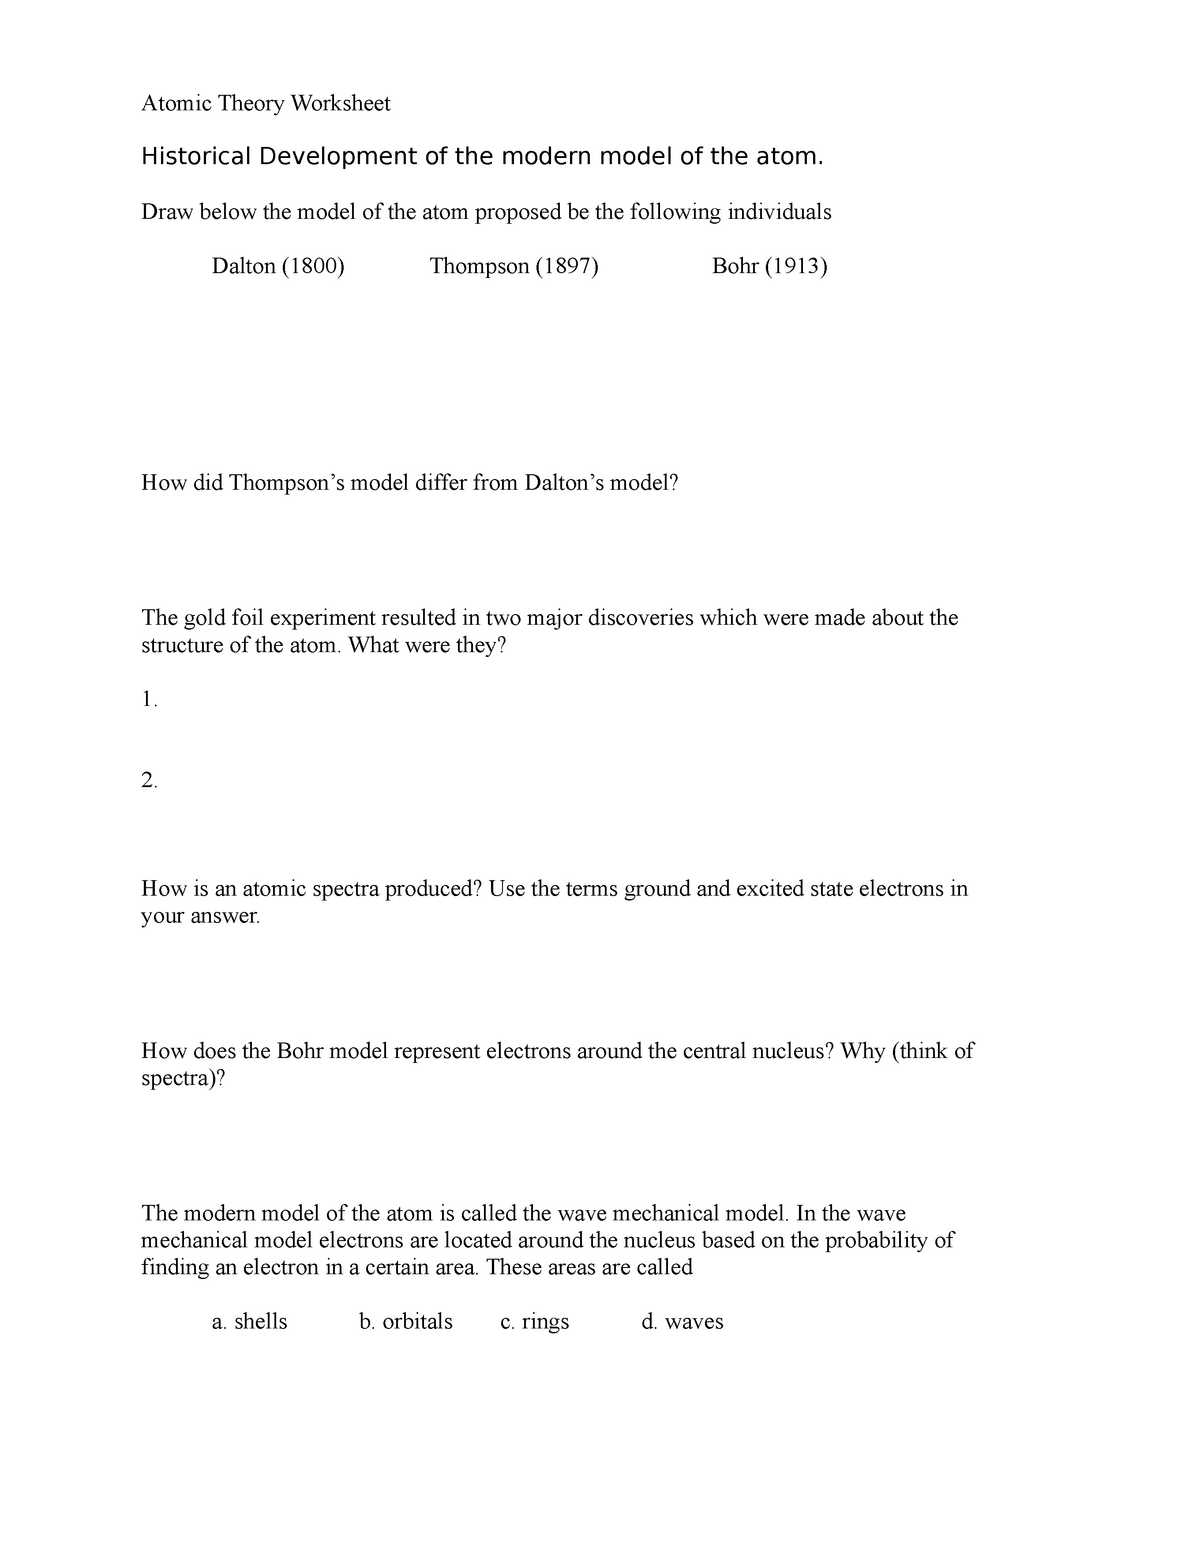 Atomic Theory Worksheet - Atomic Theory Worksheet Historical With History Of The Atom Worksheet